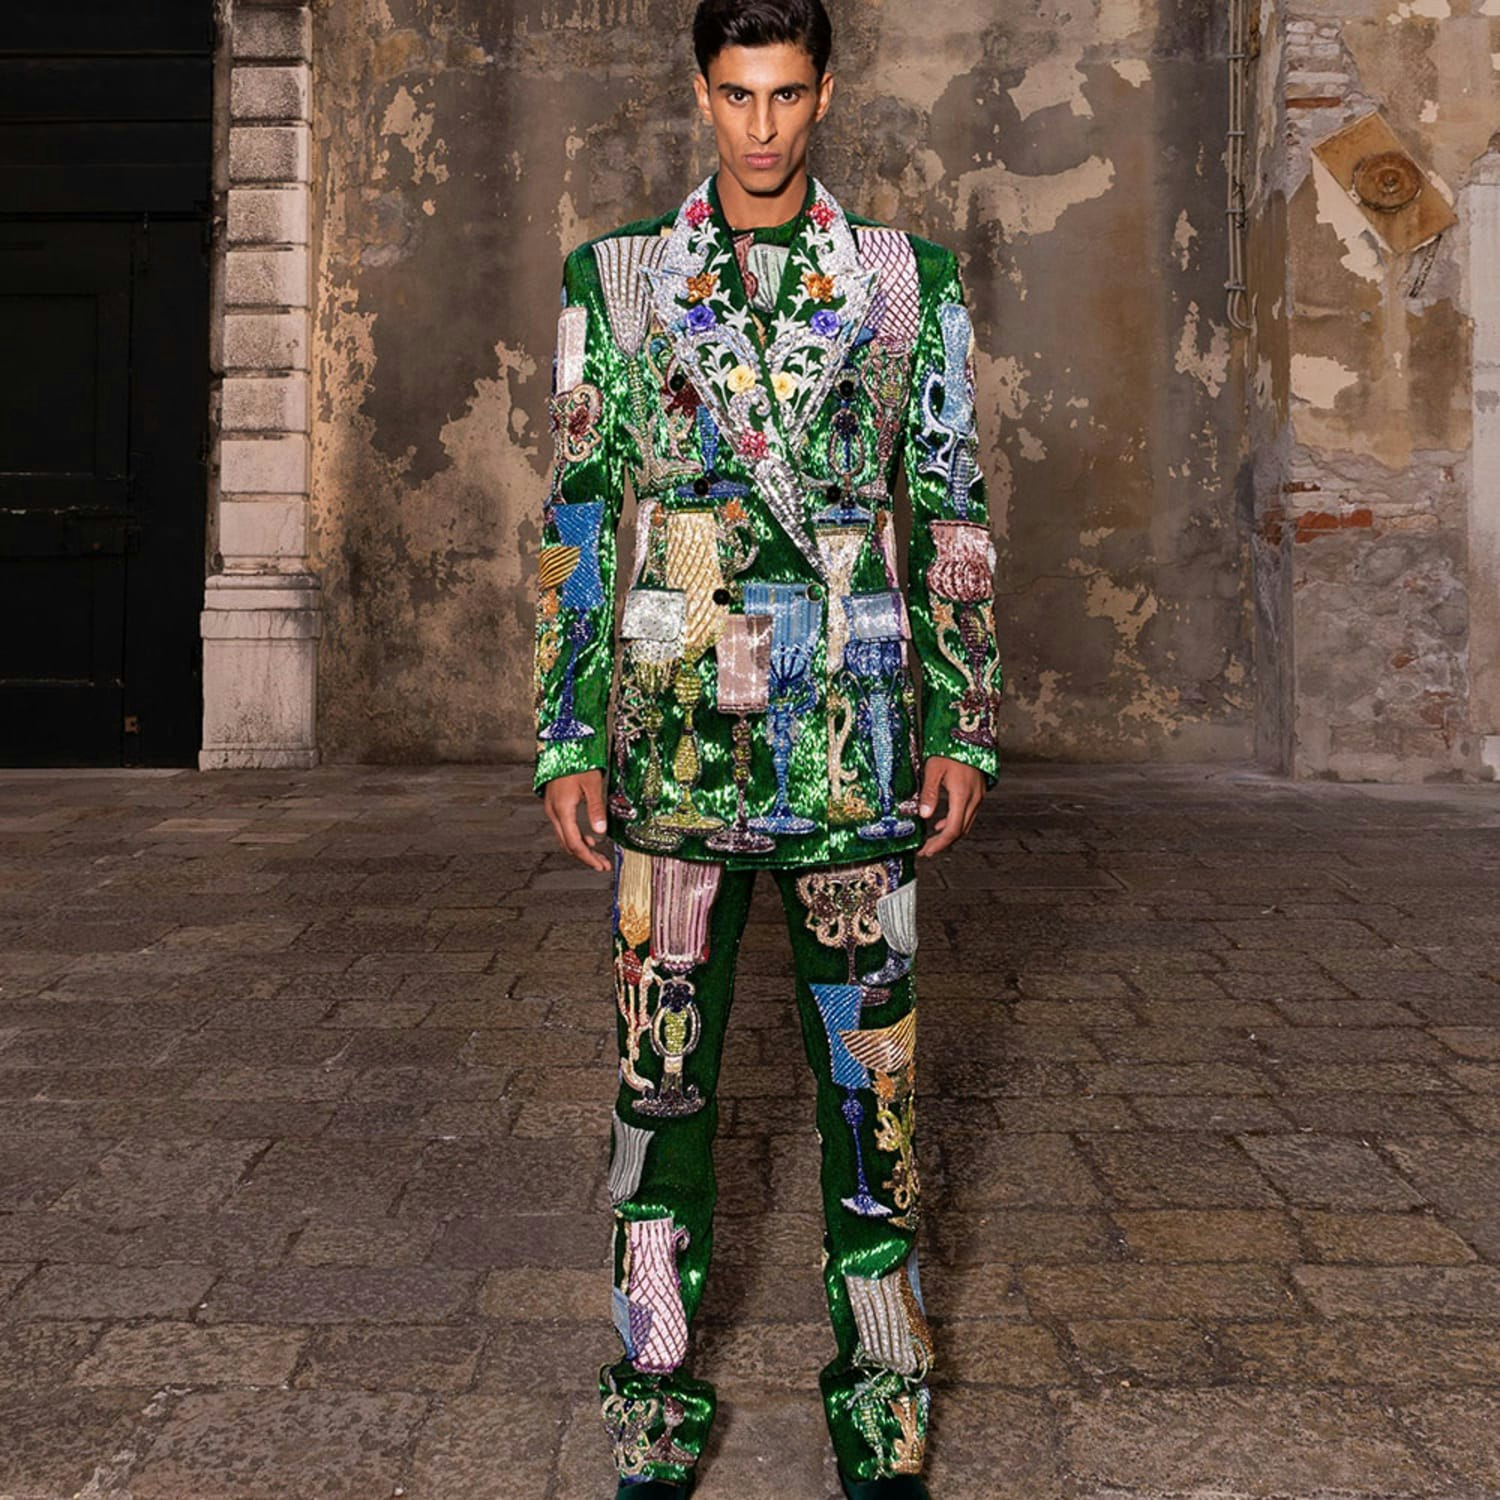 One of the NFTs auctioned by Dolce &amp; Gabbana in October. Credit: UNXD and Dolce &amp; Gabbana